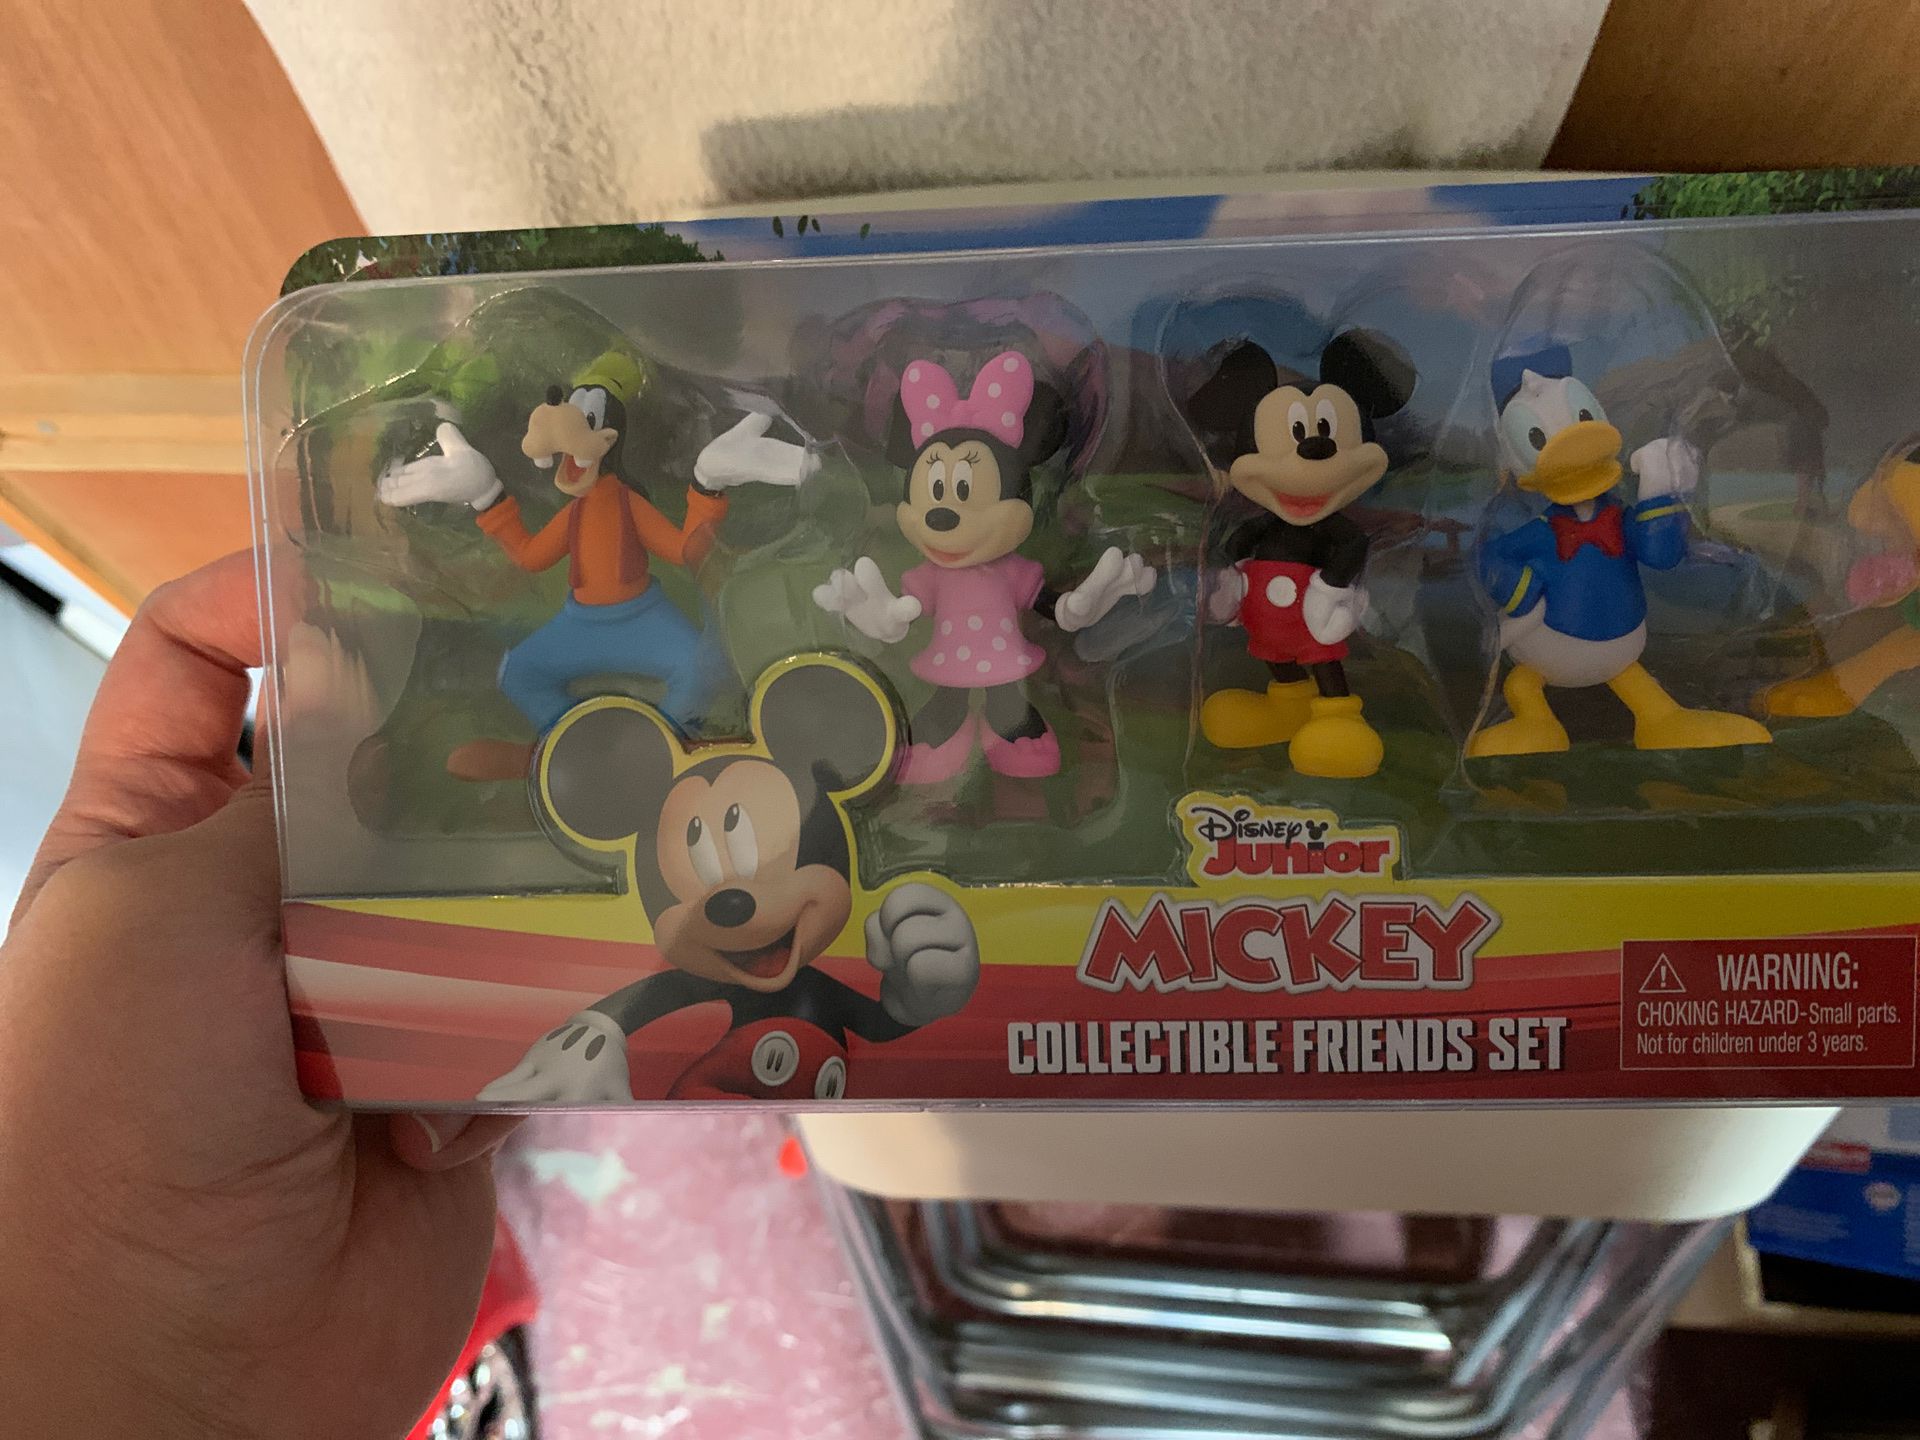 Brand new Mickey Mouse collectible toy set